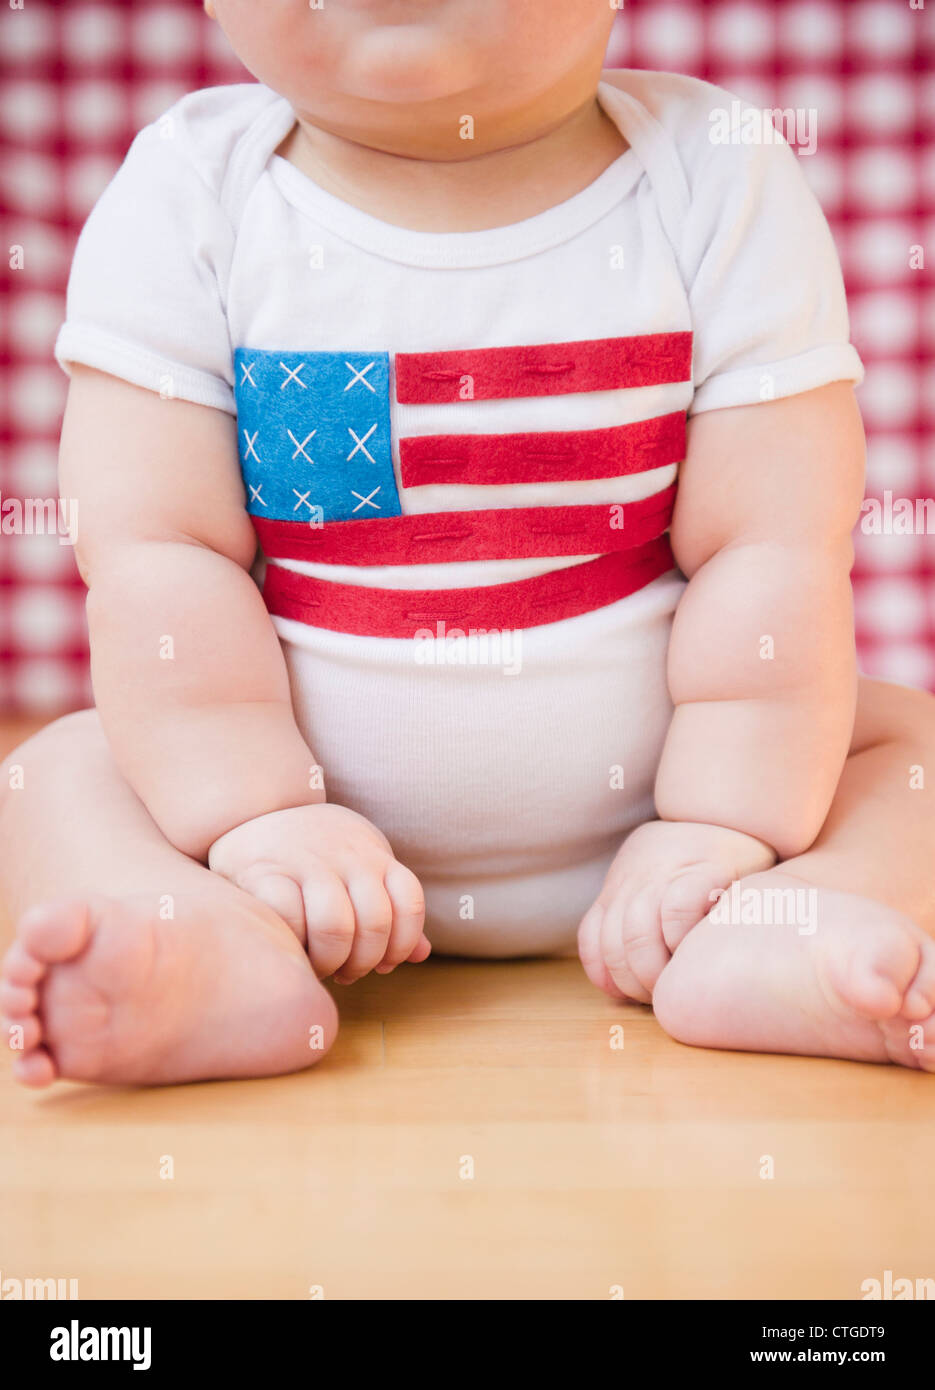 Caucasian baby boy in onesie with American flag on it Stock Photo